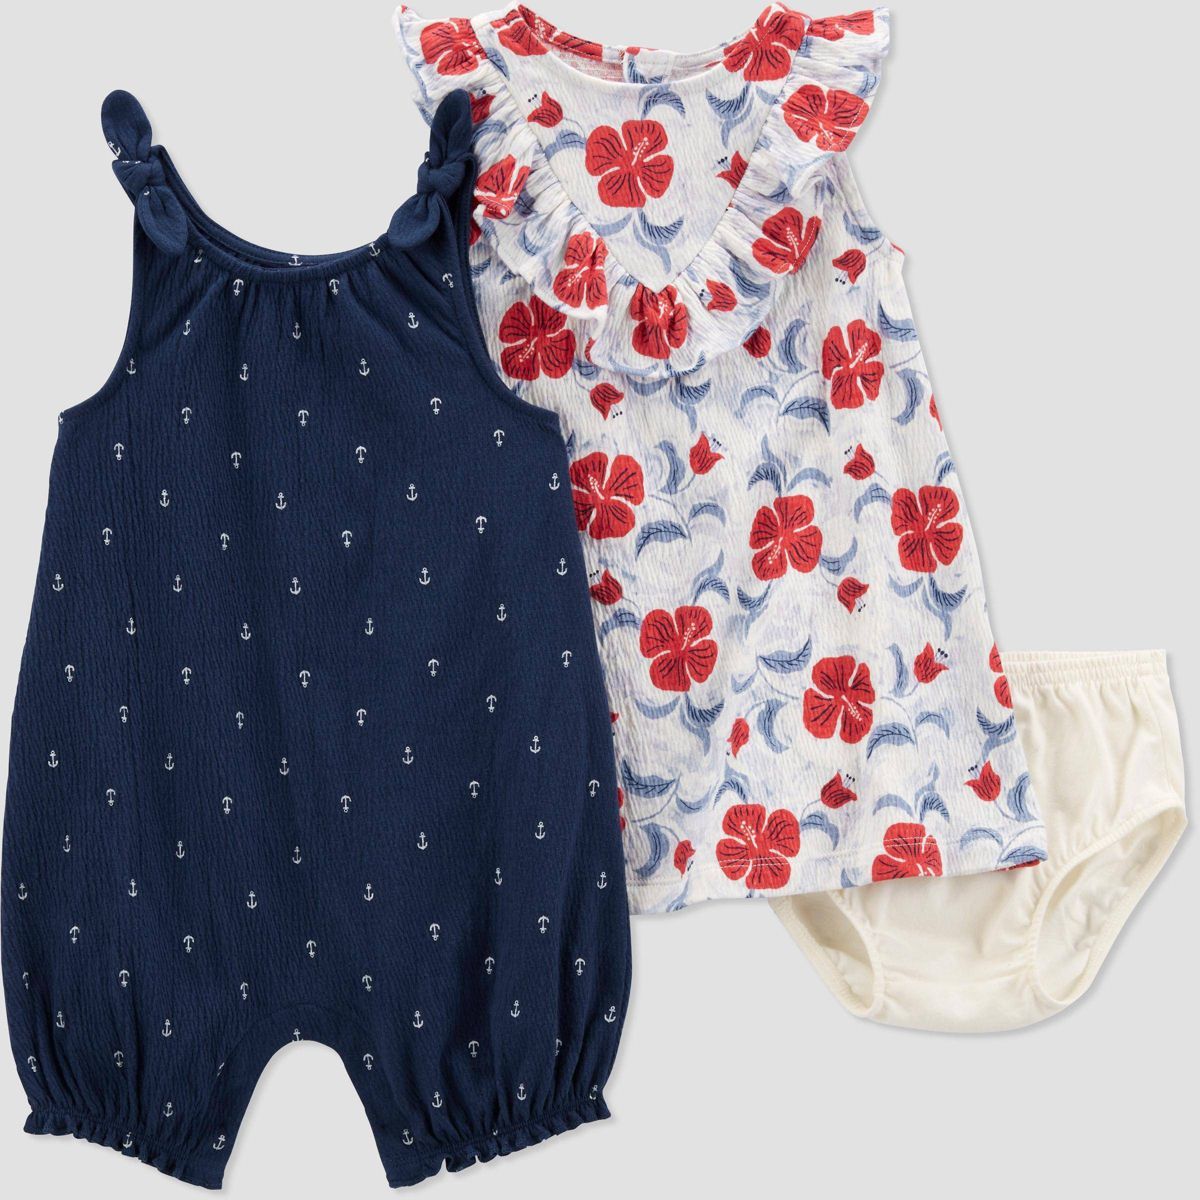 Carter's Just One You® Baby Girls' Anchor Romper & Floral Dress - Navy Blue/White | Target